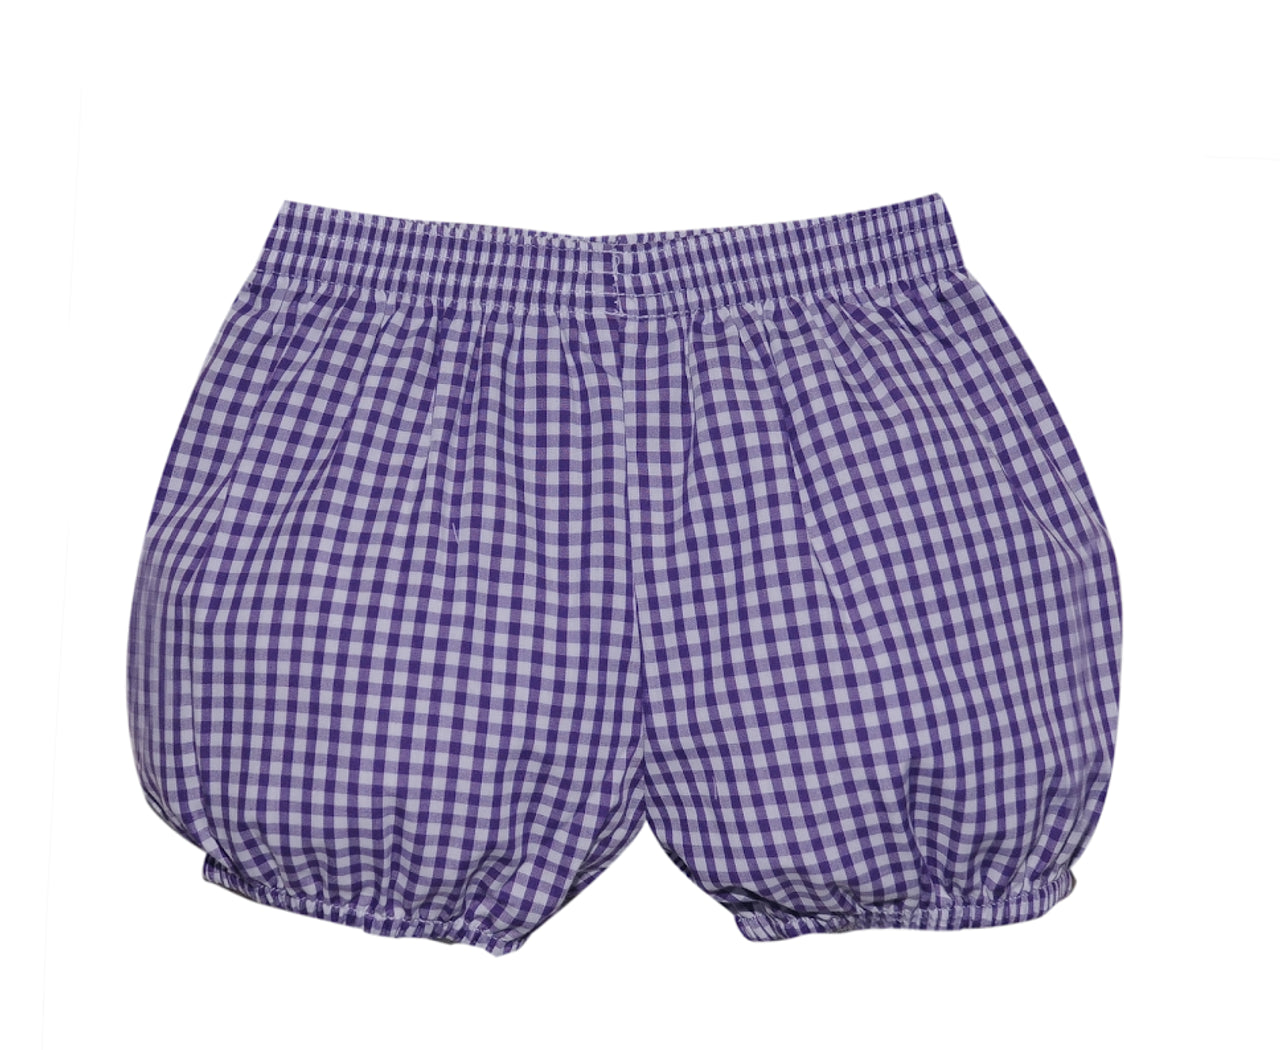 Southern Saturday Girl's Bloomers